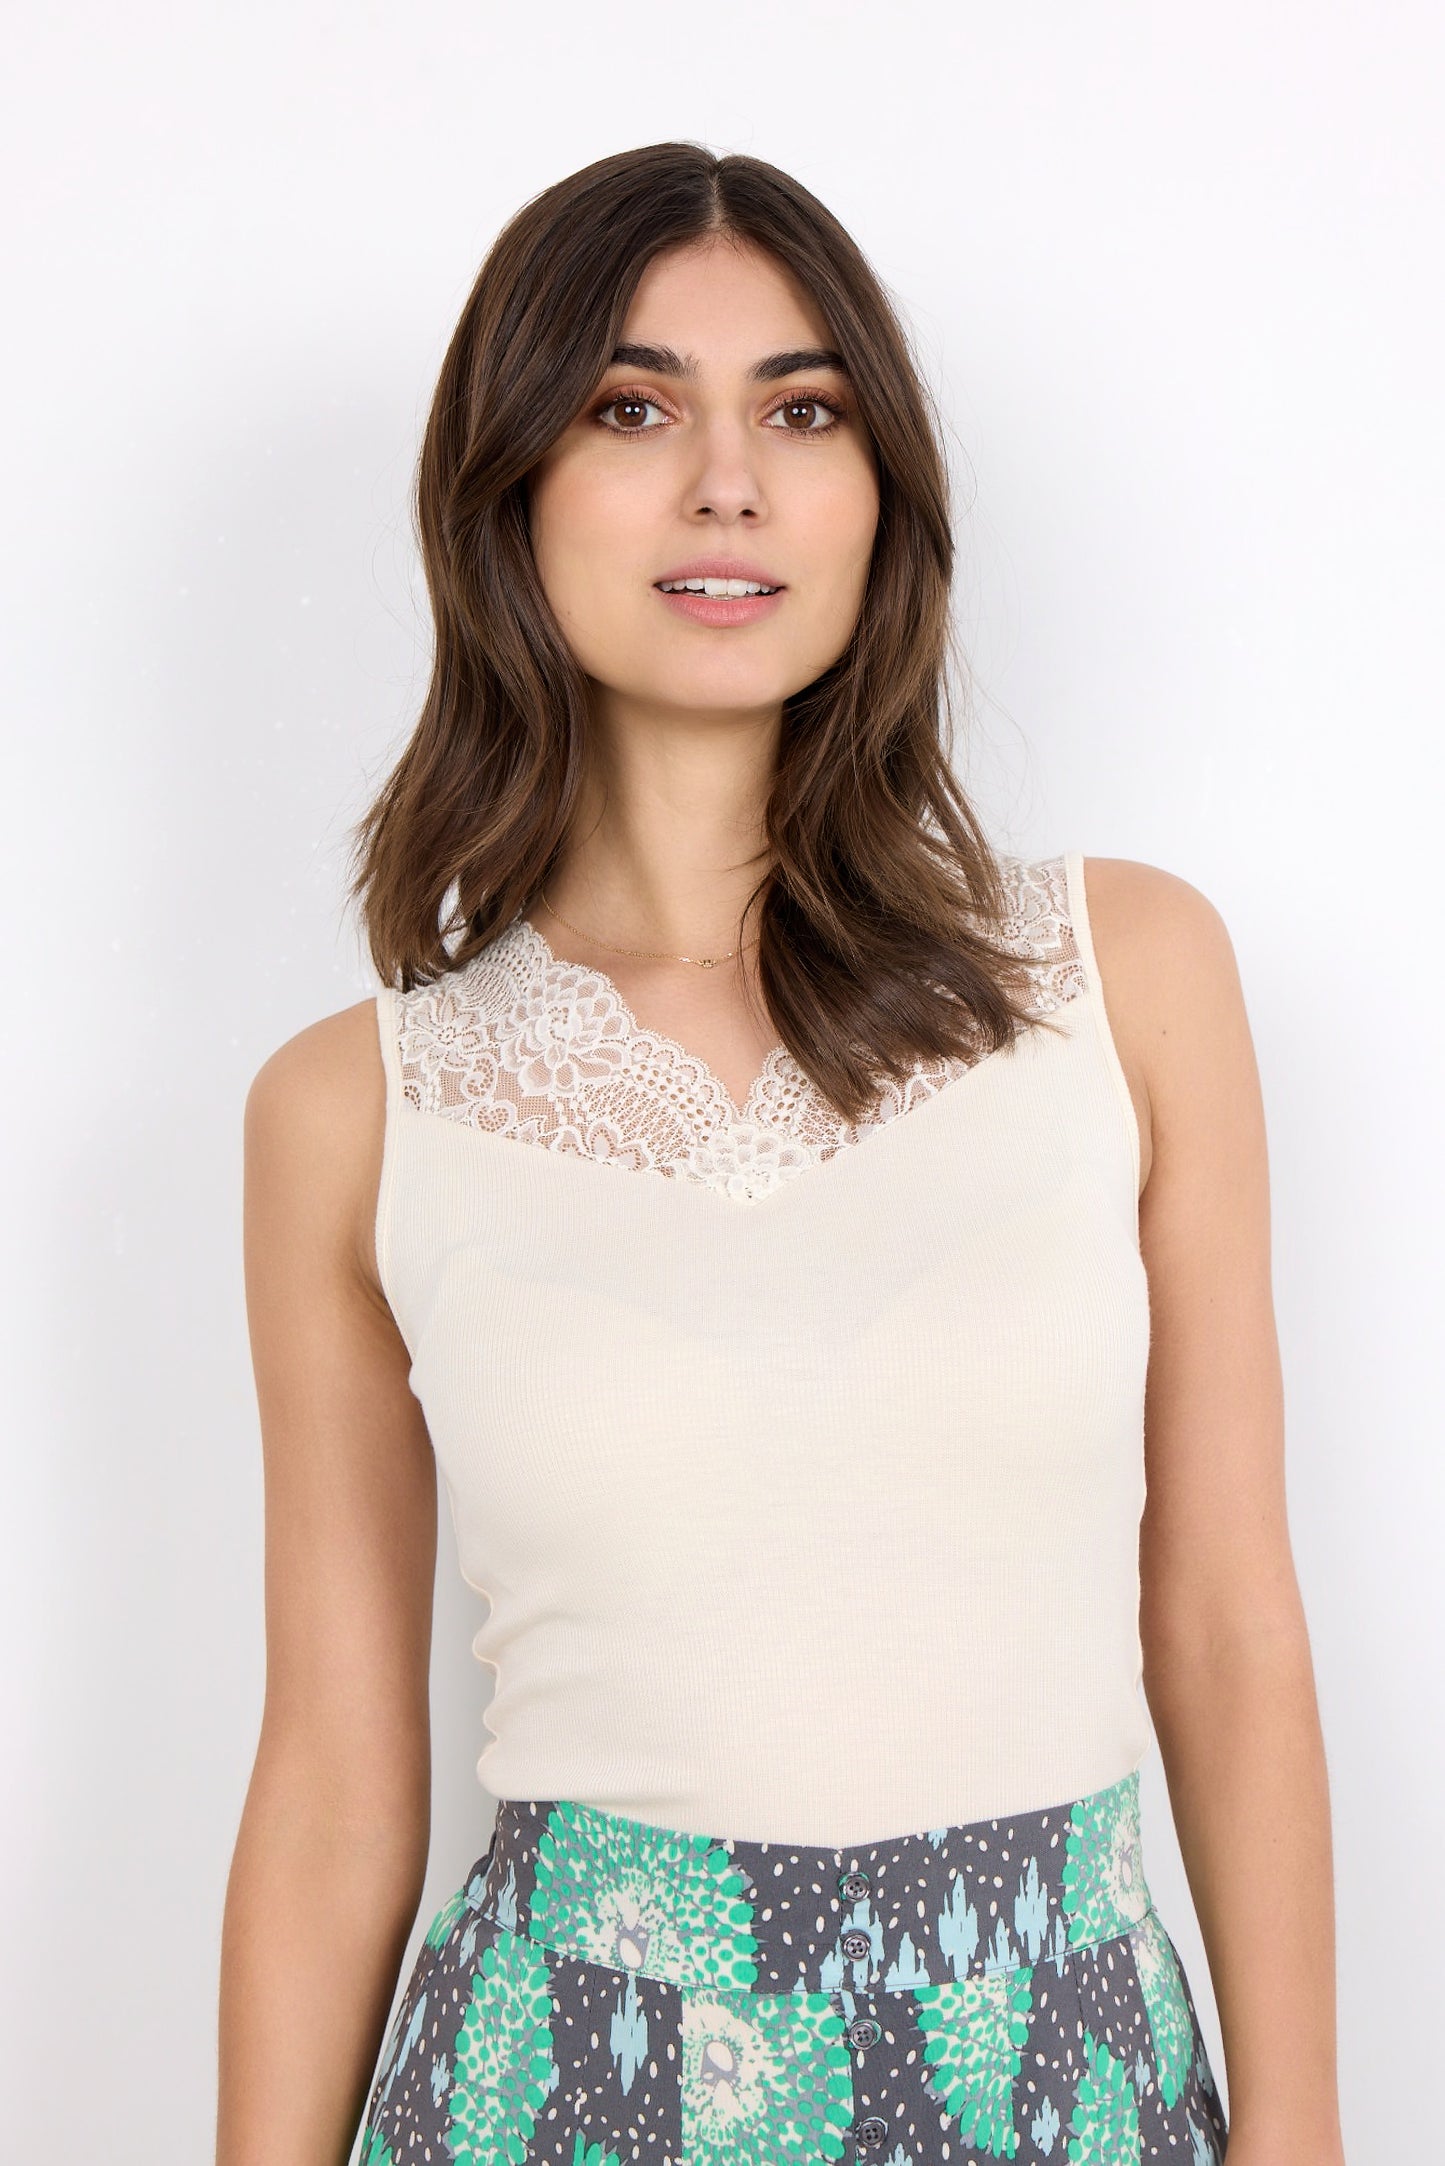 SOYA CONCEPT Ryan 31 Ribbed Lace Collared Camisole